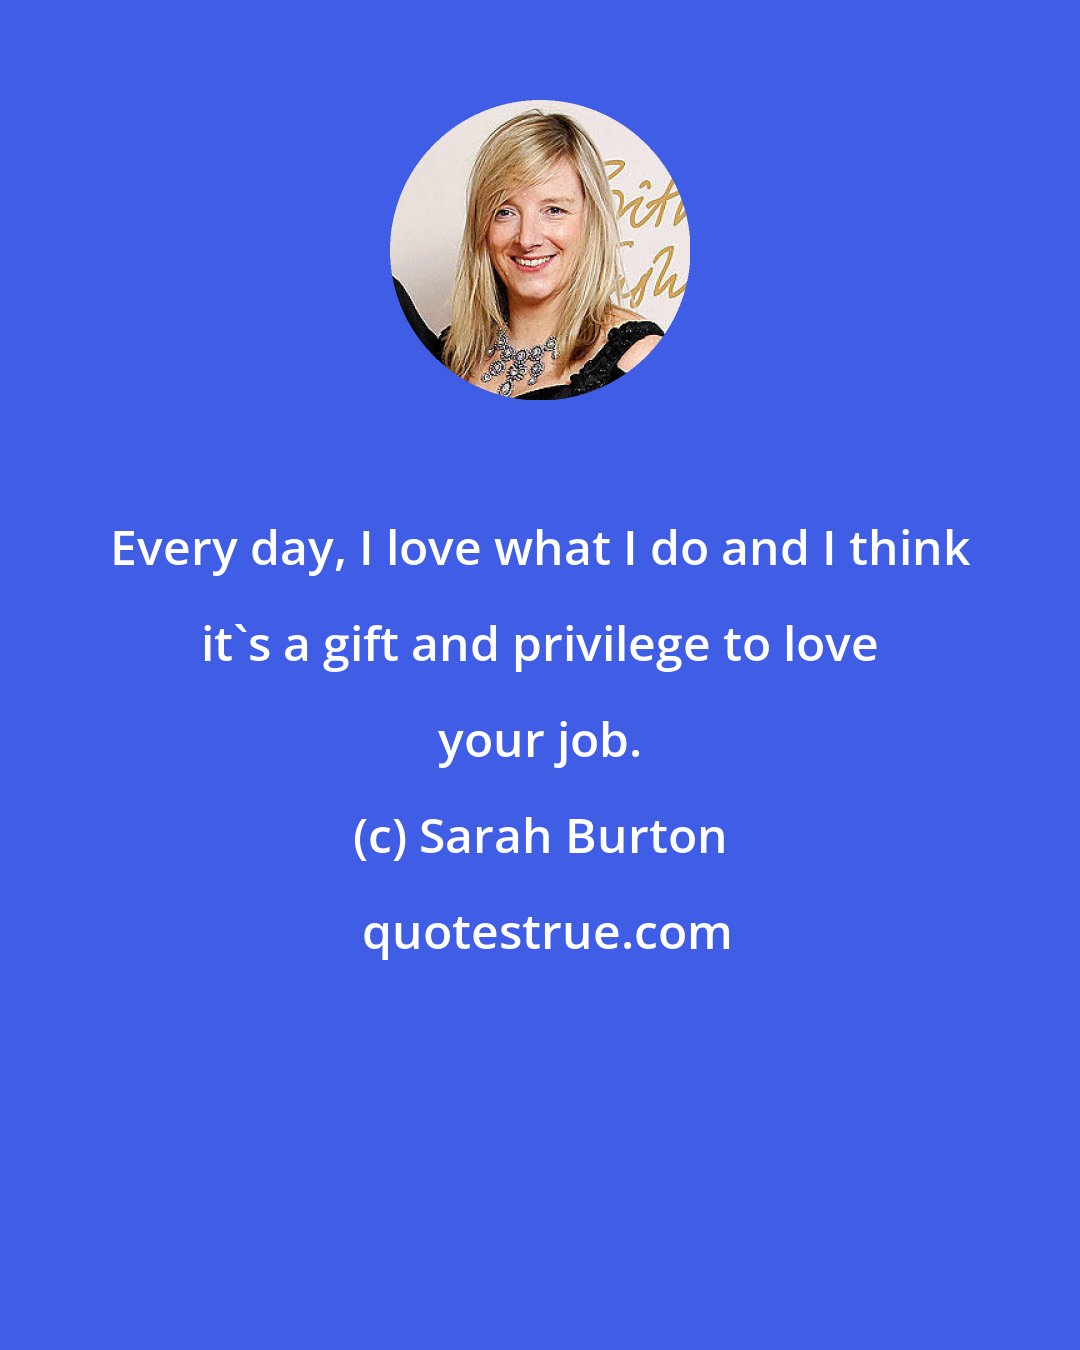 Sarah Burton: Every day, I love what I do and I think it's a gift and privilege to love your job.